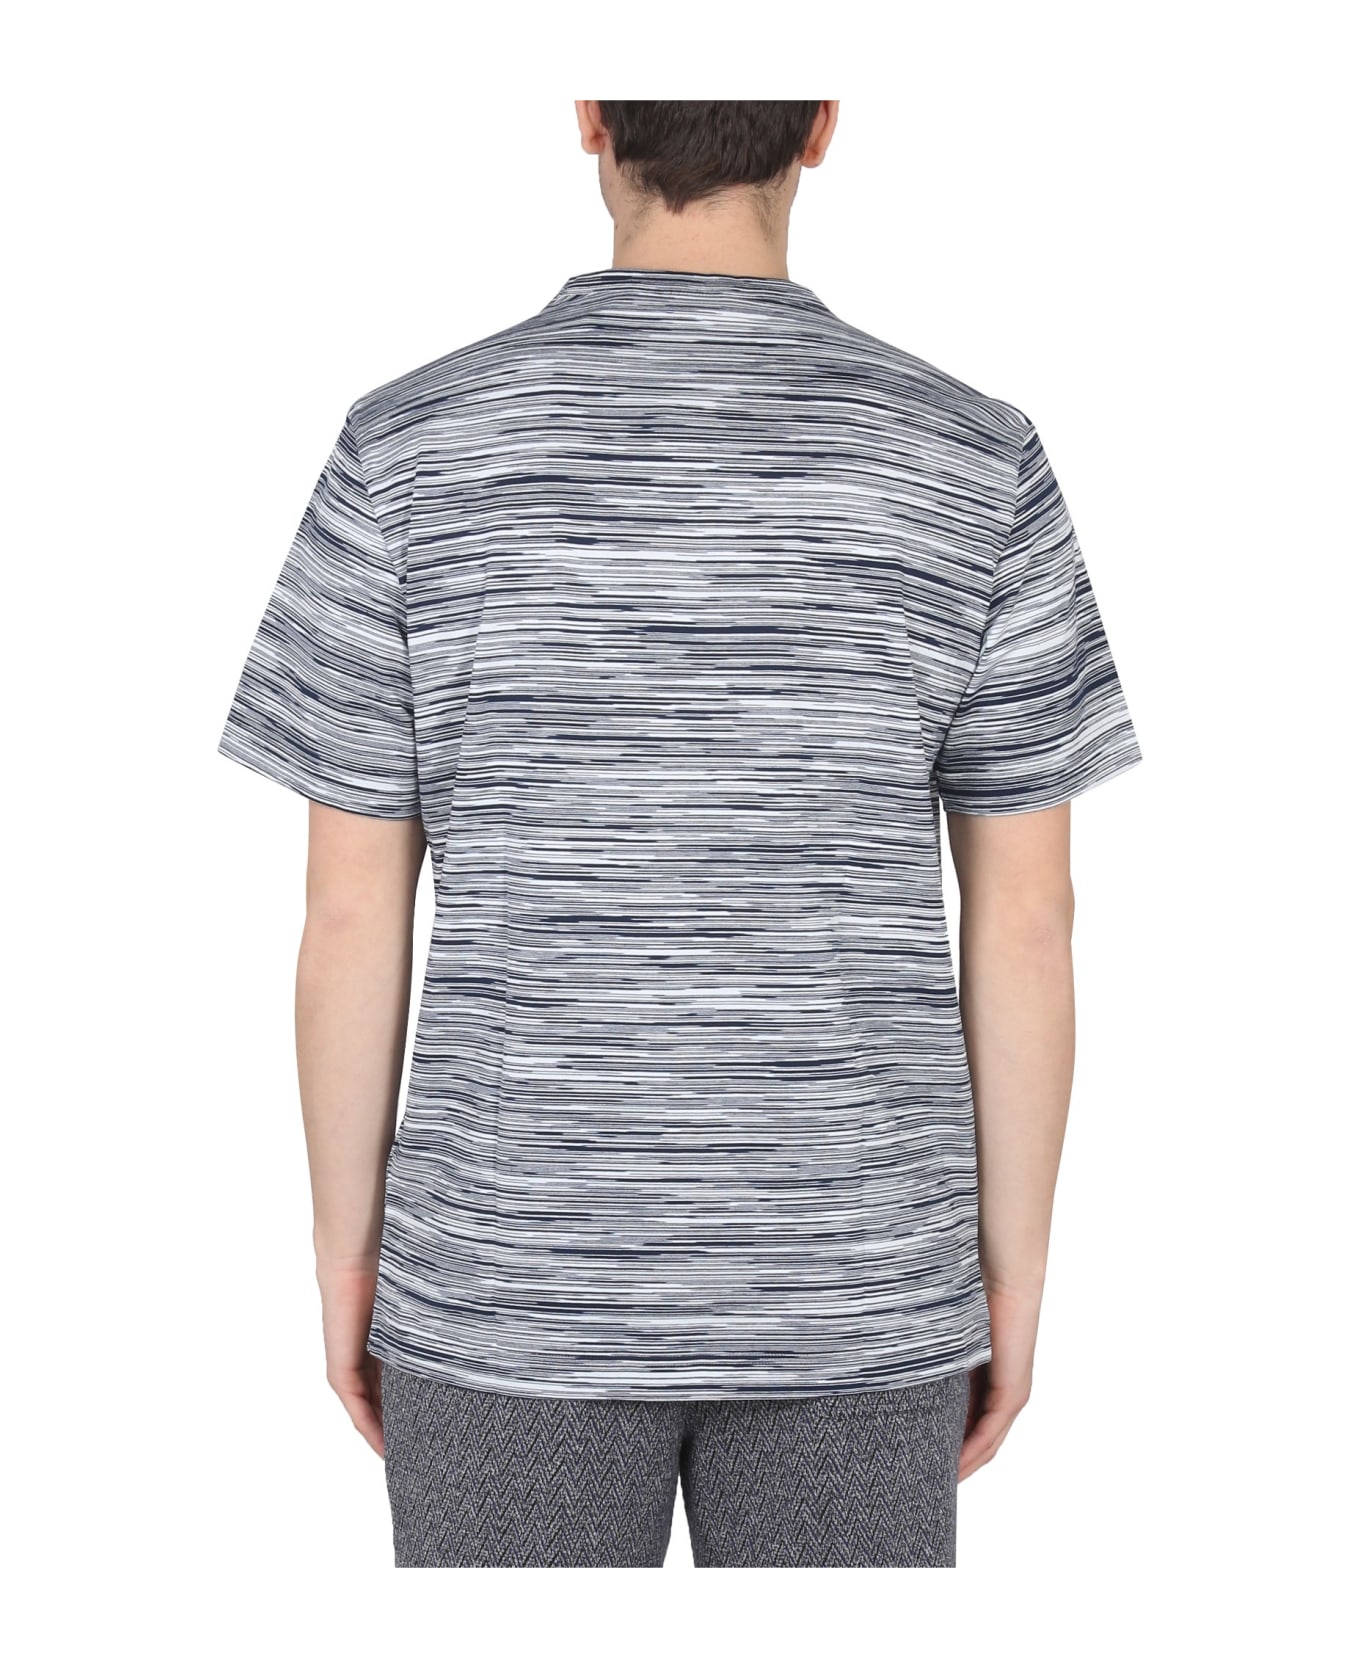 Missoni Space Dyed T-shirt - F703I